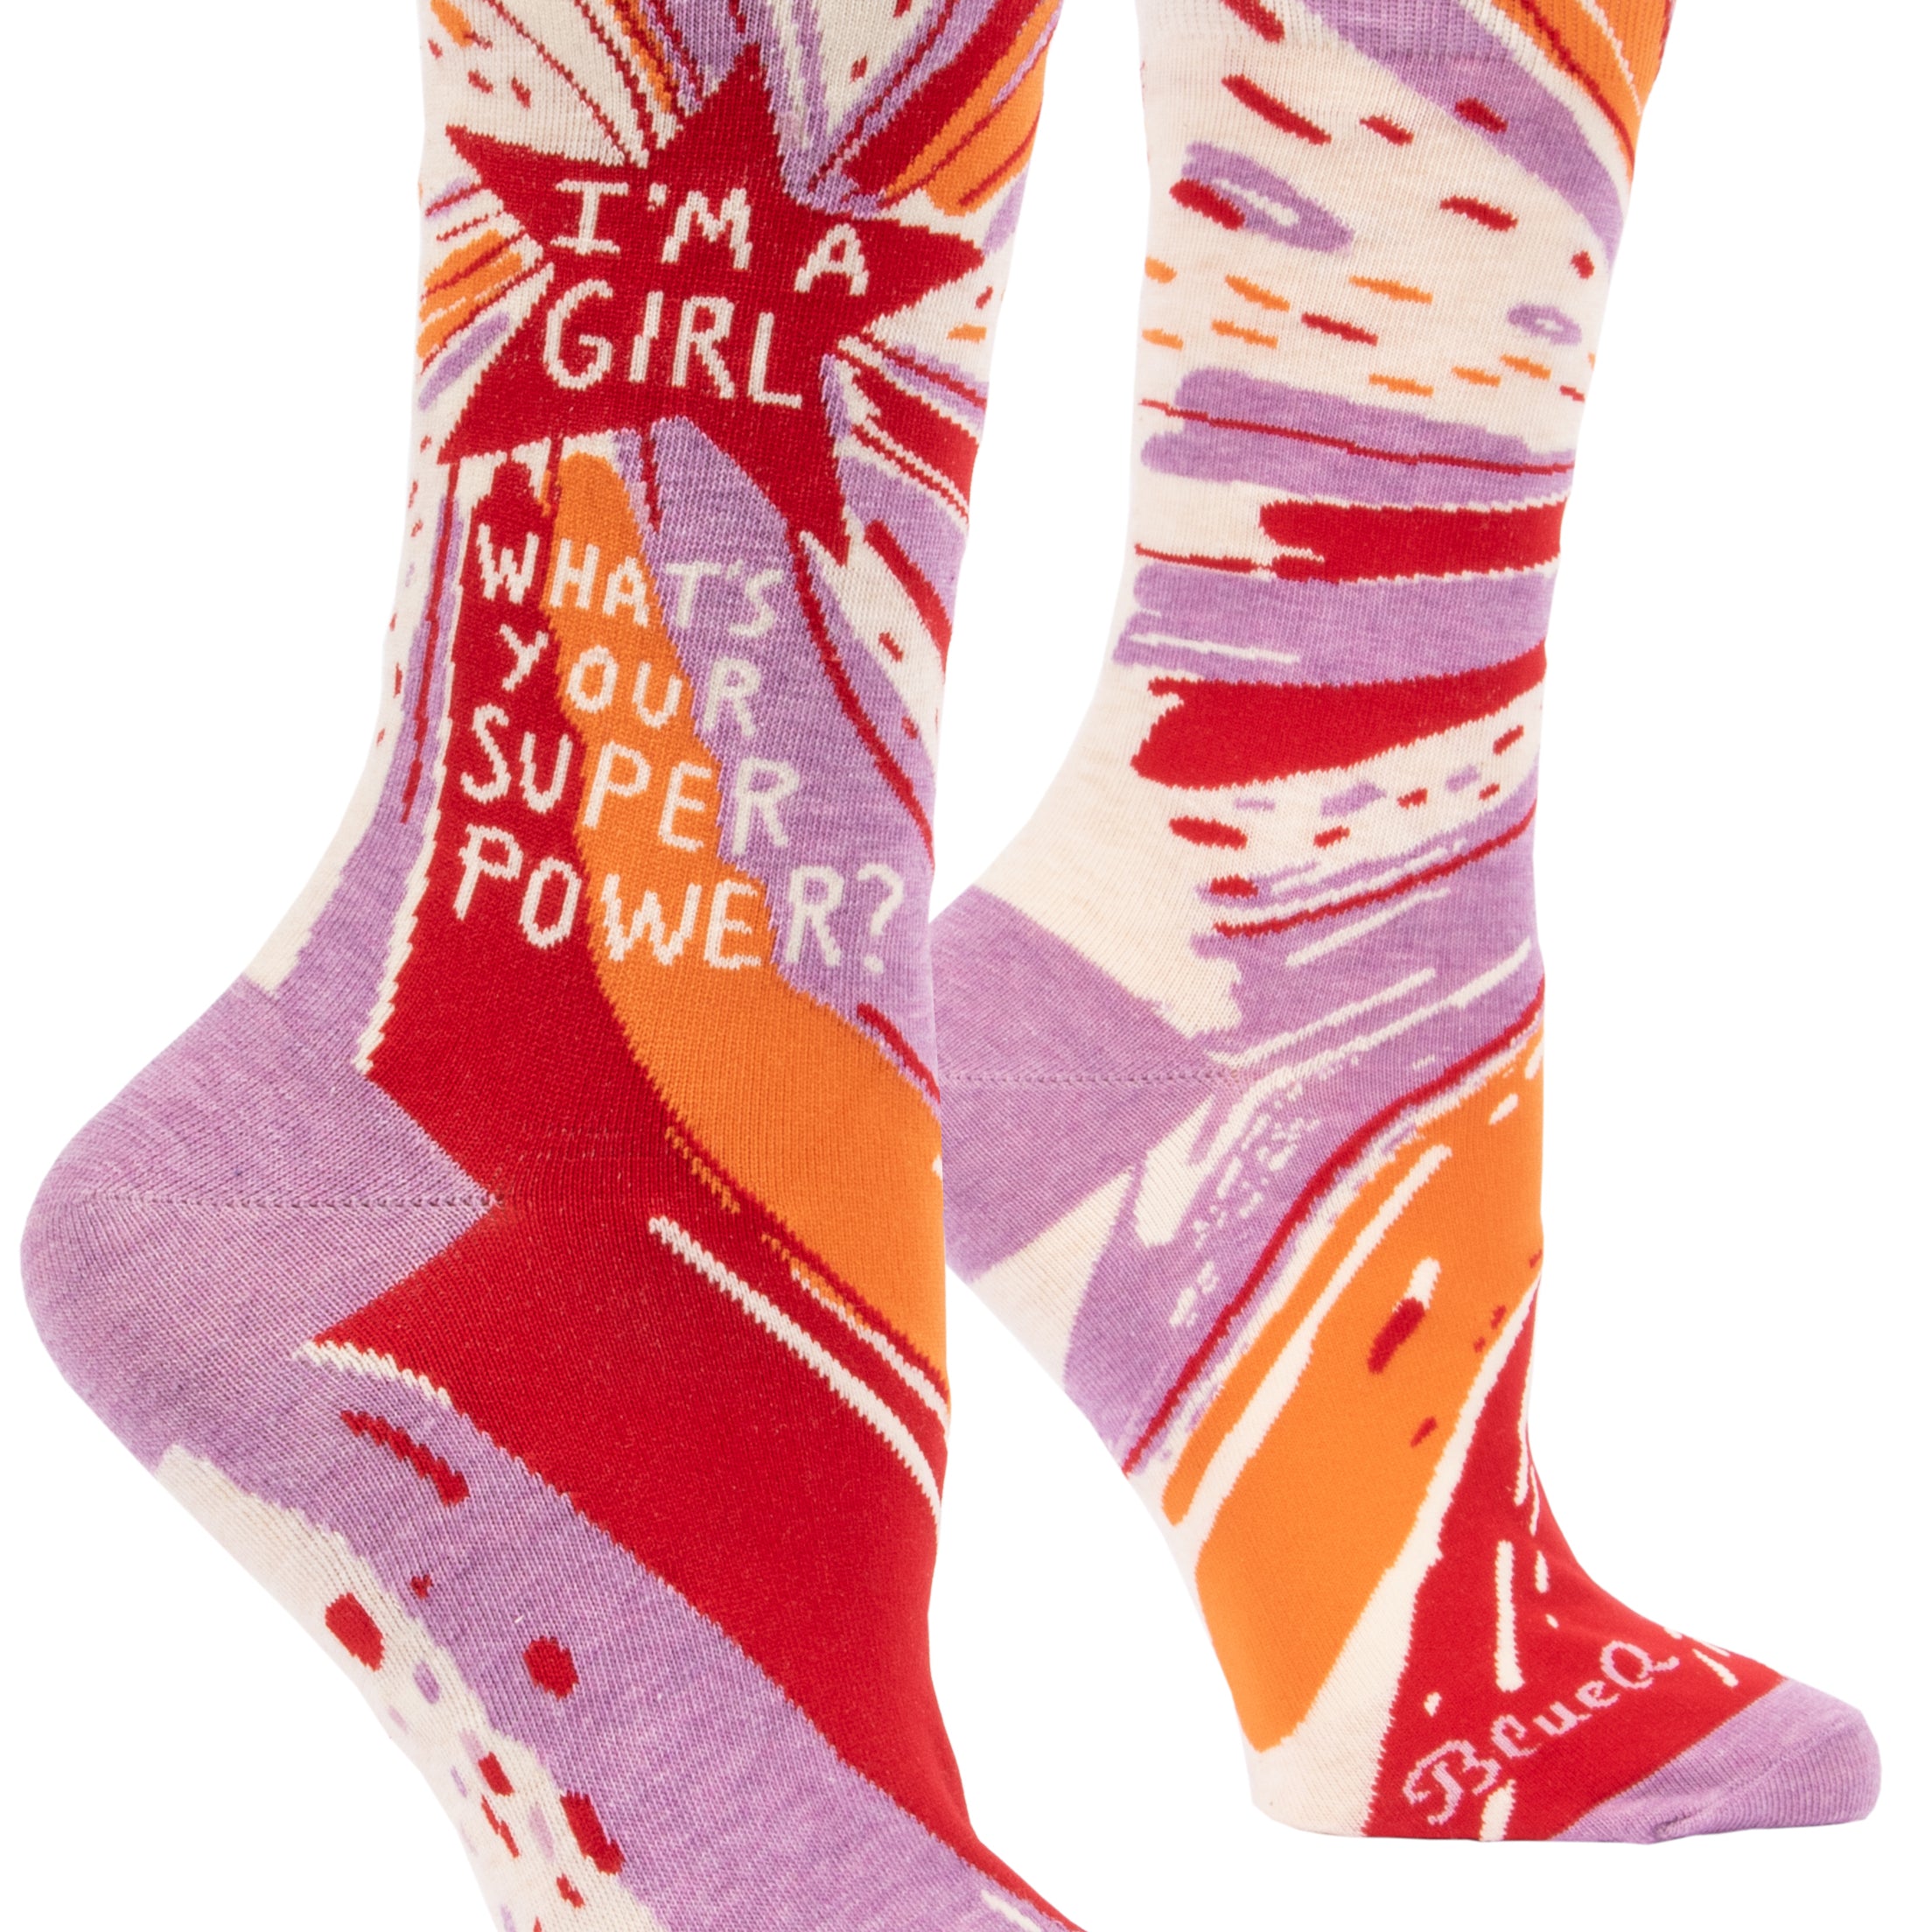 socks with purple orange cream and red swatches big red star on ankle that says i'm a girl what's your superpower?